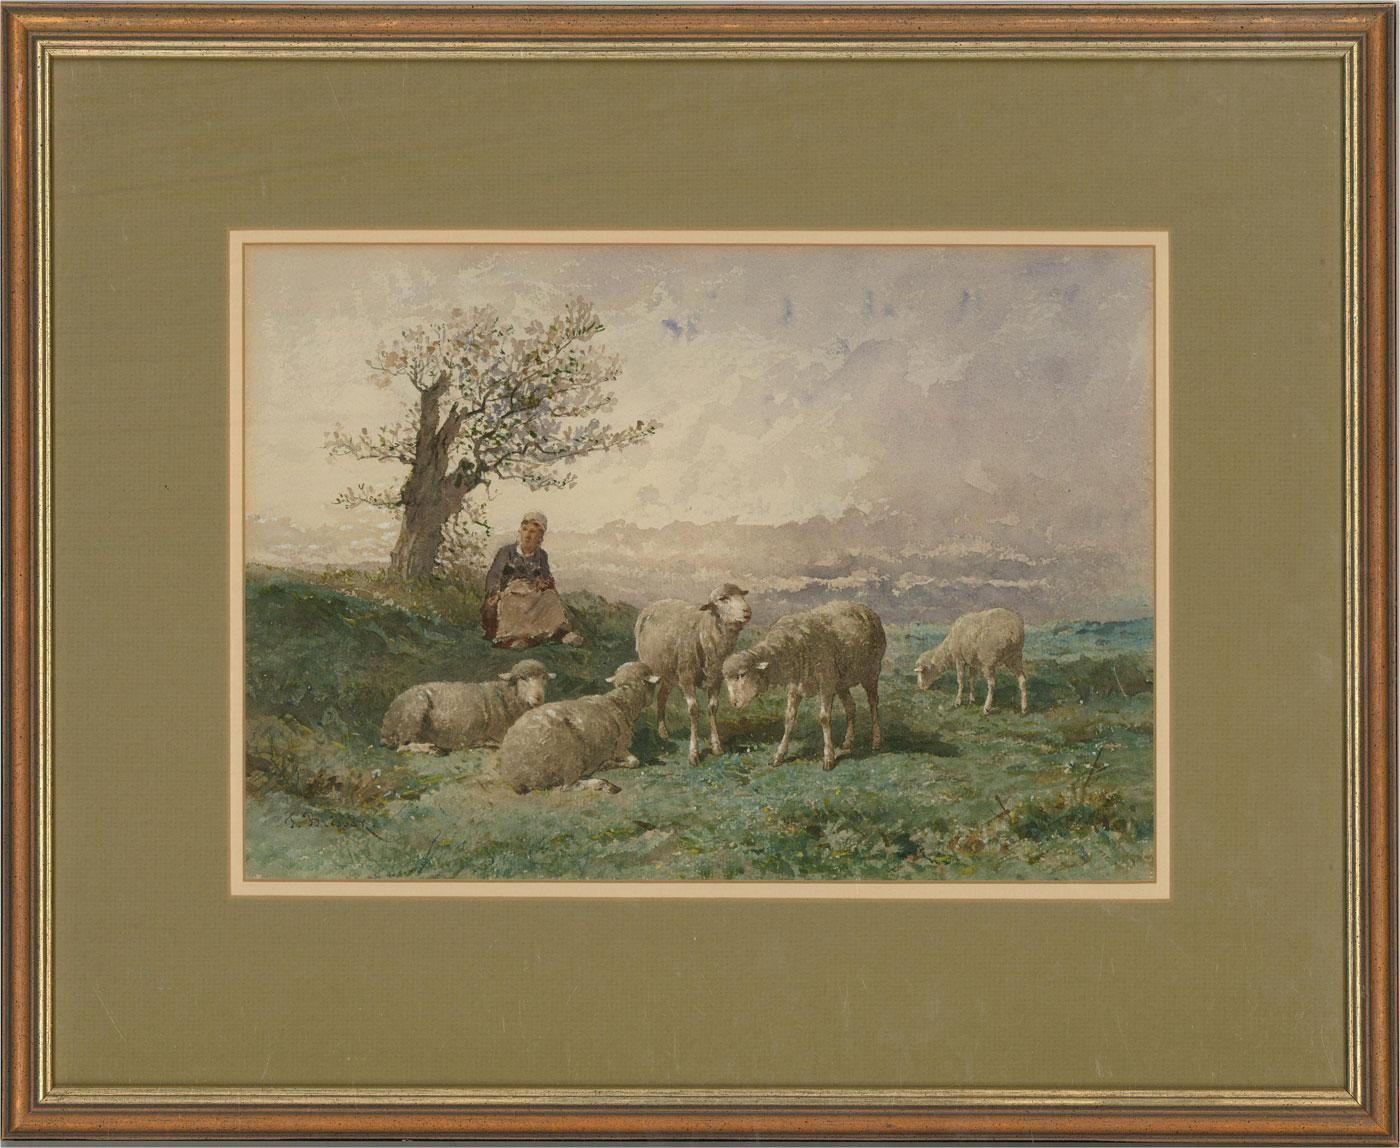 A fine watercolour painting with gouache details by the artist Frank Brissot, depicting a charming landscape scene with a figure sat under an olive tree with sheep nearby. Signed to the lower left-hand corner. Well-presented in a double card mount